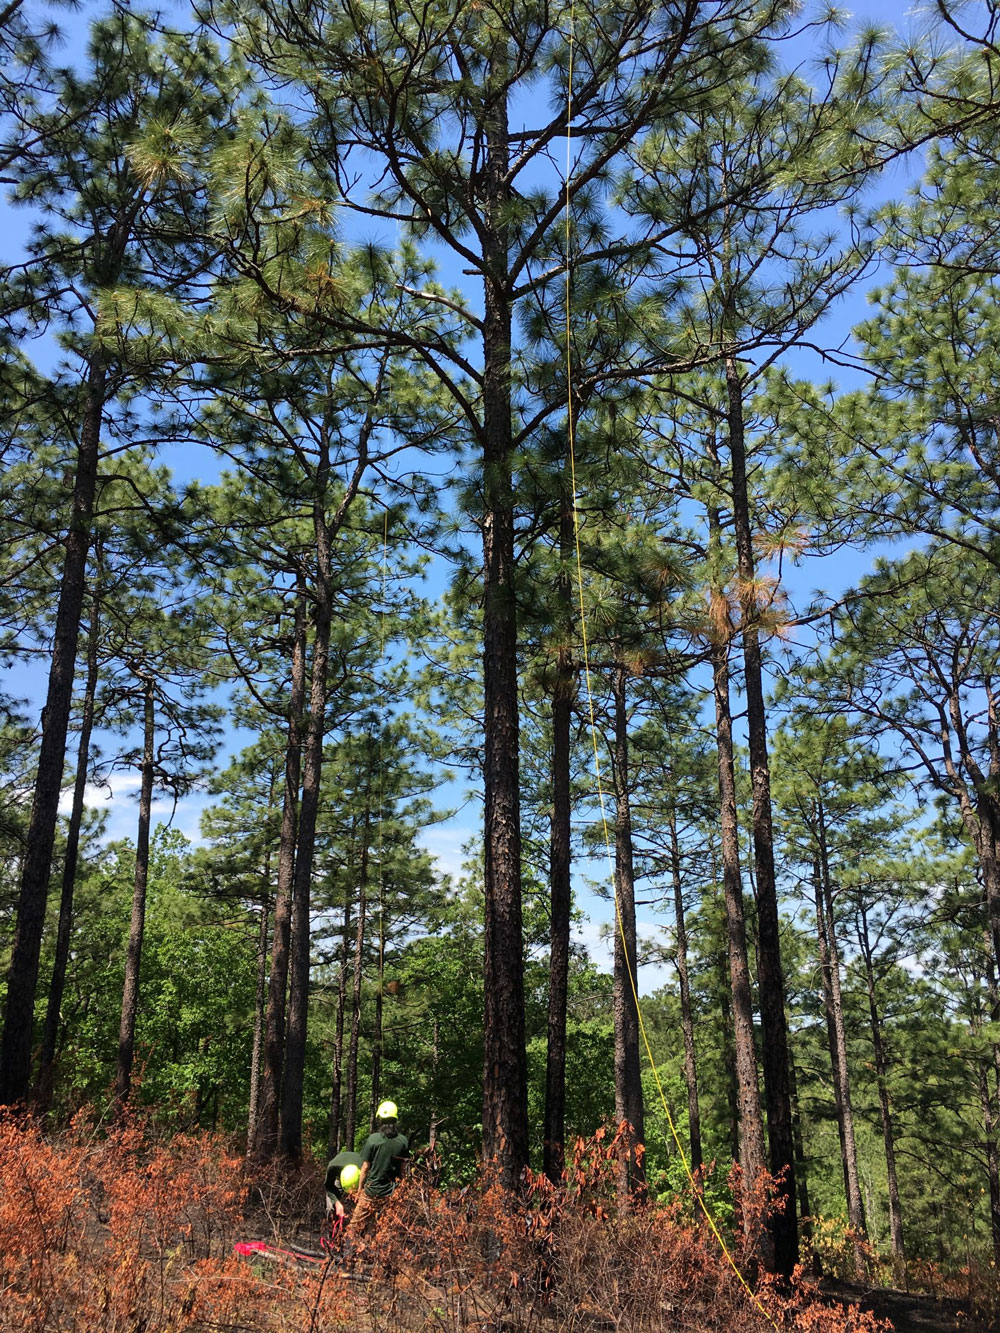 Dahlin and her field team collect leaves from the top of a longleaf pine in Talladega National Forest, Alabama, shortly after a controlled burn. 